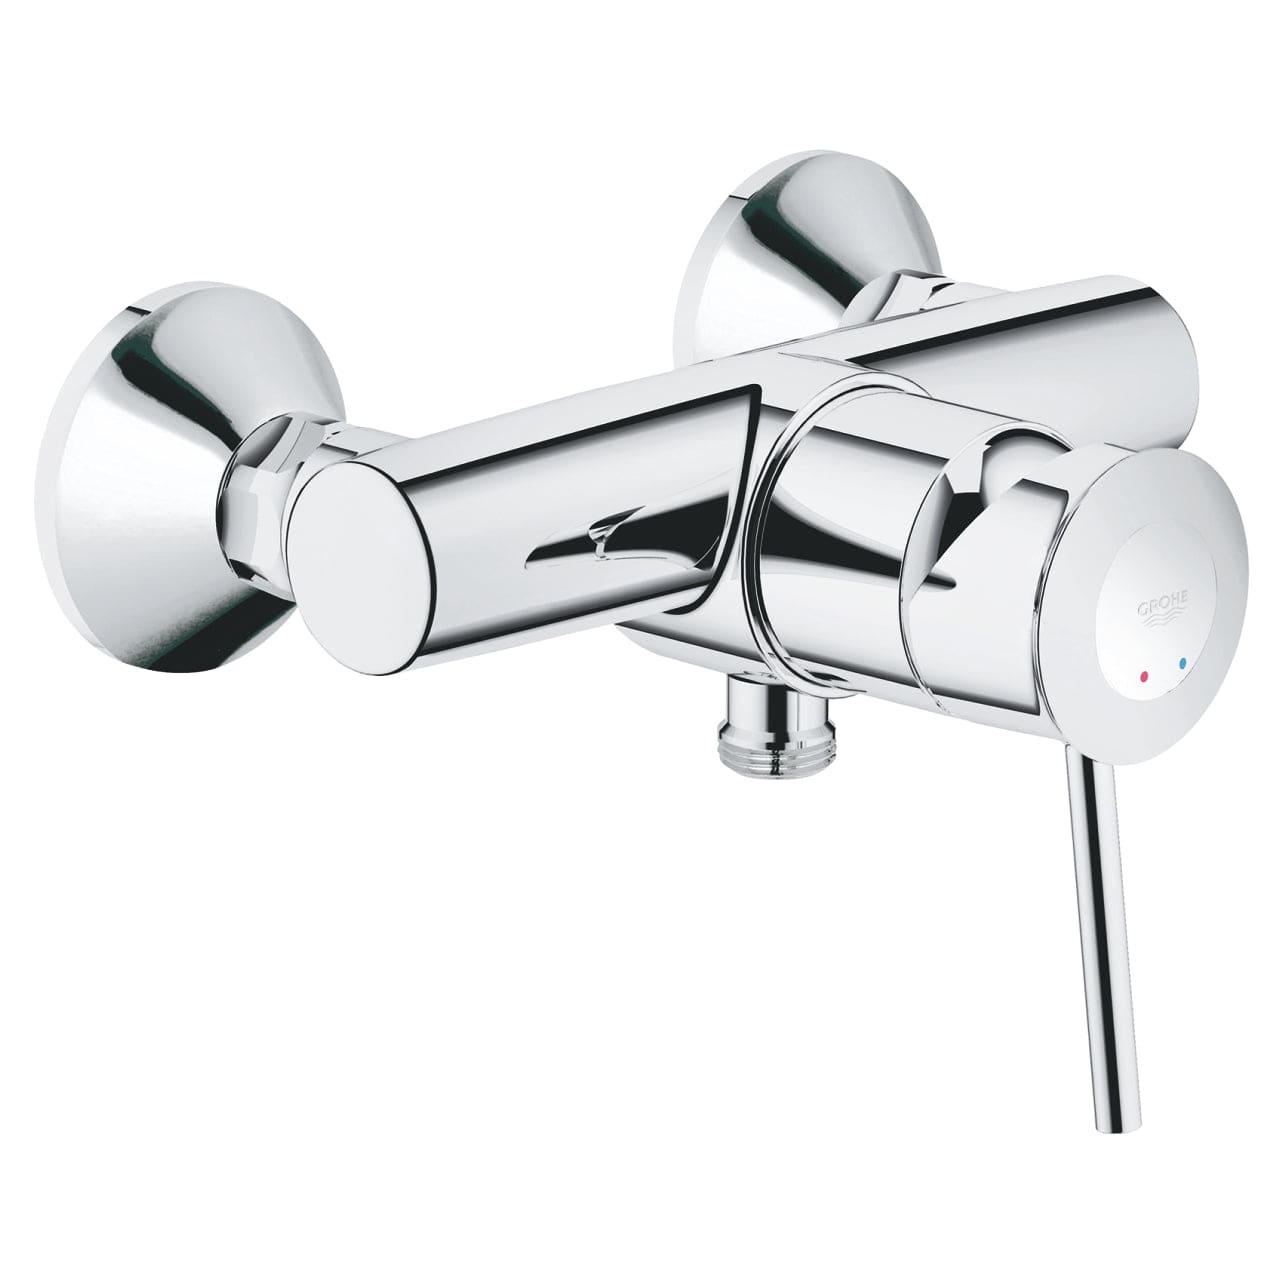 Villeroy & Boch Architectura Single-lever Shower Mixer, Chrome | Supply Master | Accra, Ghana Bathroom Faucet Buy Tools hardware Building materials